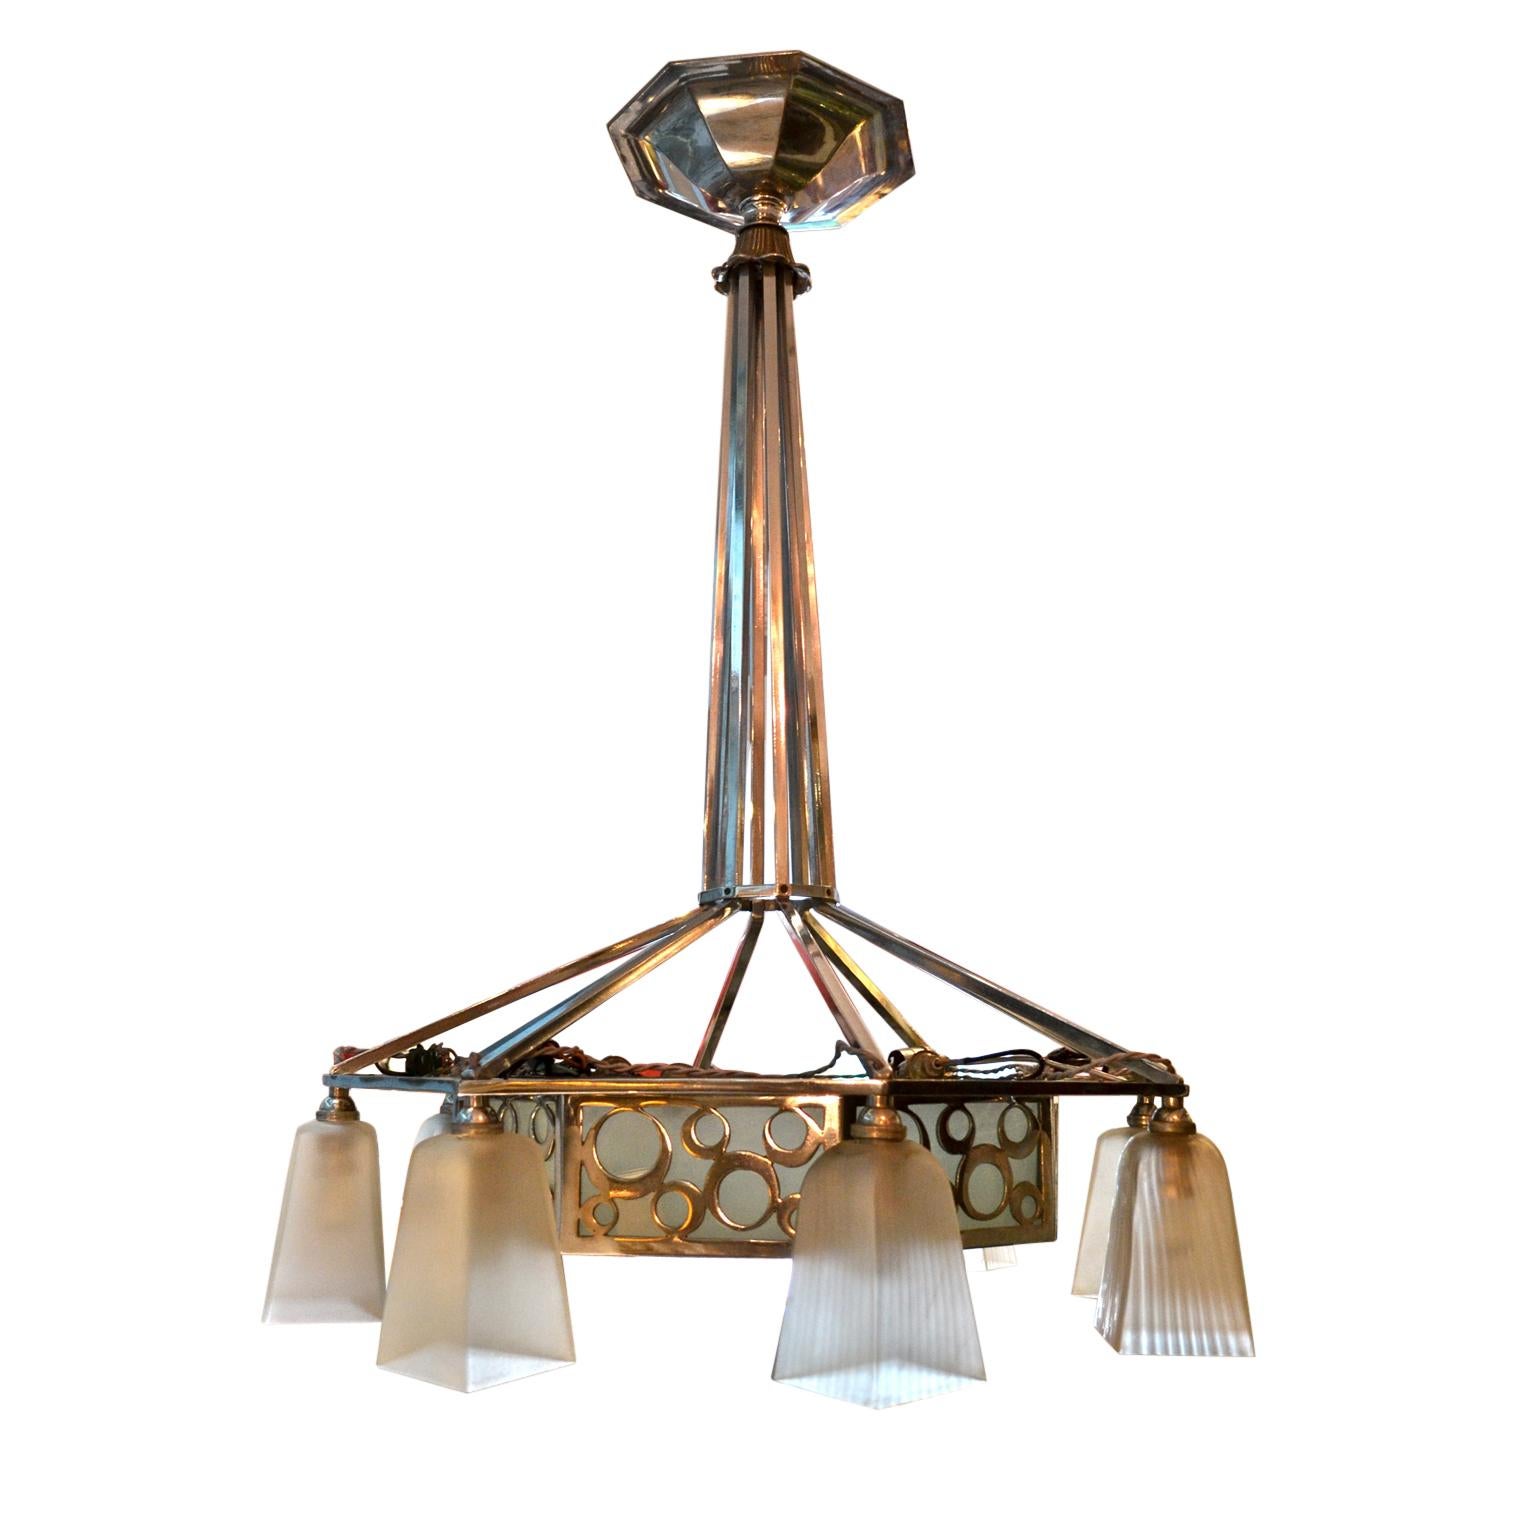 A period Art Deco nickel silver and frosted glass chandelier; eight frosted globes, (slight variation in two globes) are suspended from the lower octagonal ring with ‘bubble’ design open metal work; France circa 1930.
Dimensions: 37?H (94cm) x 28?W